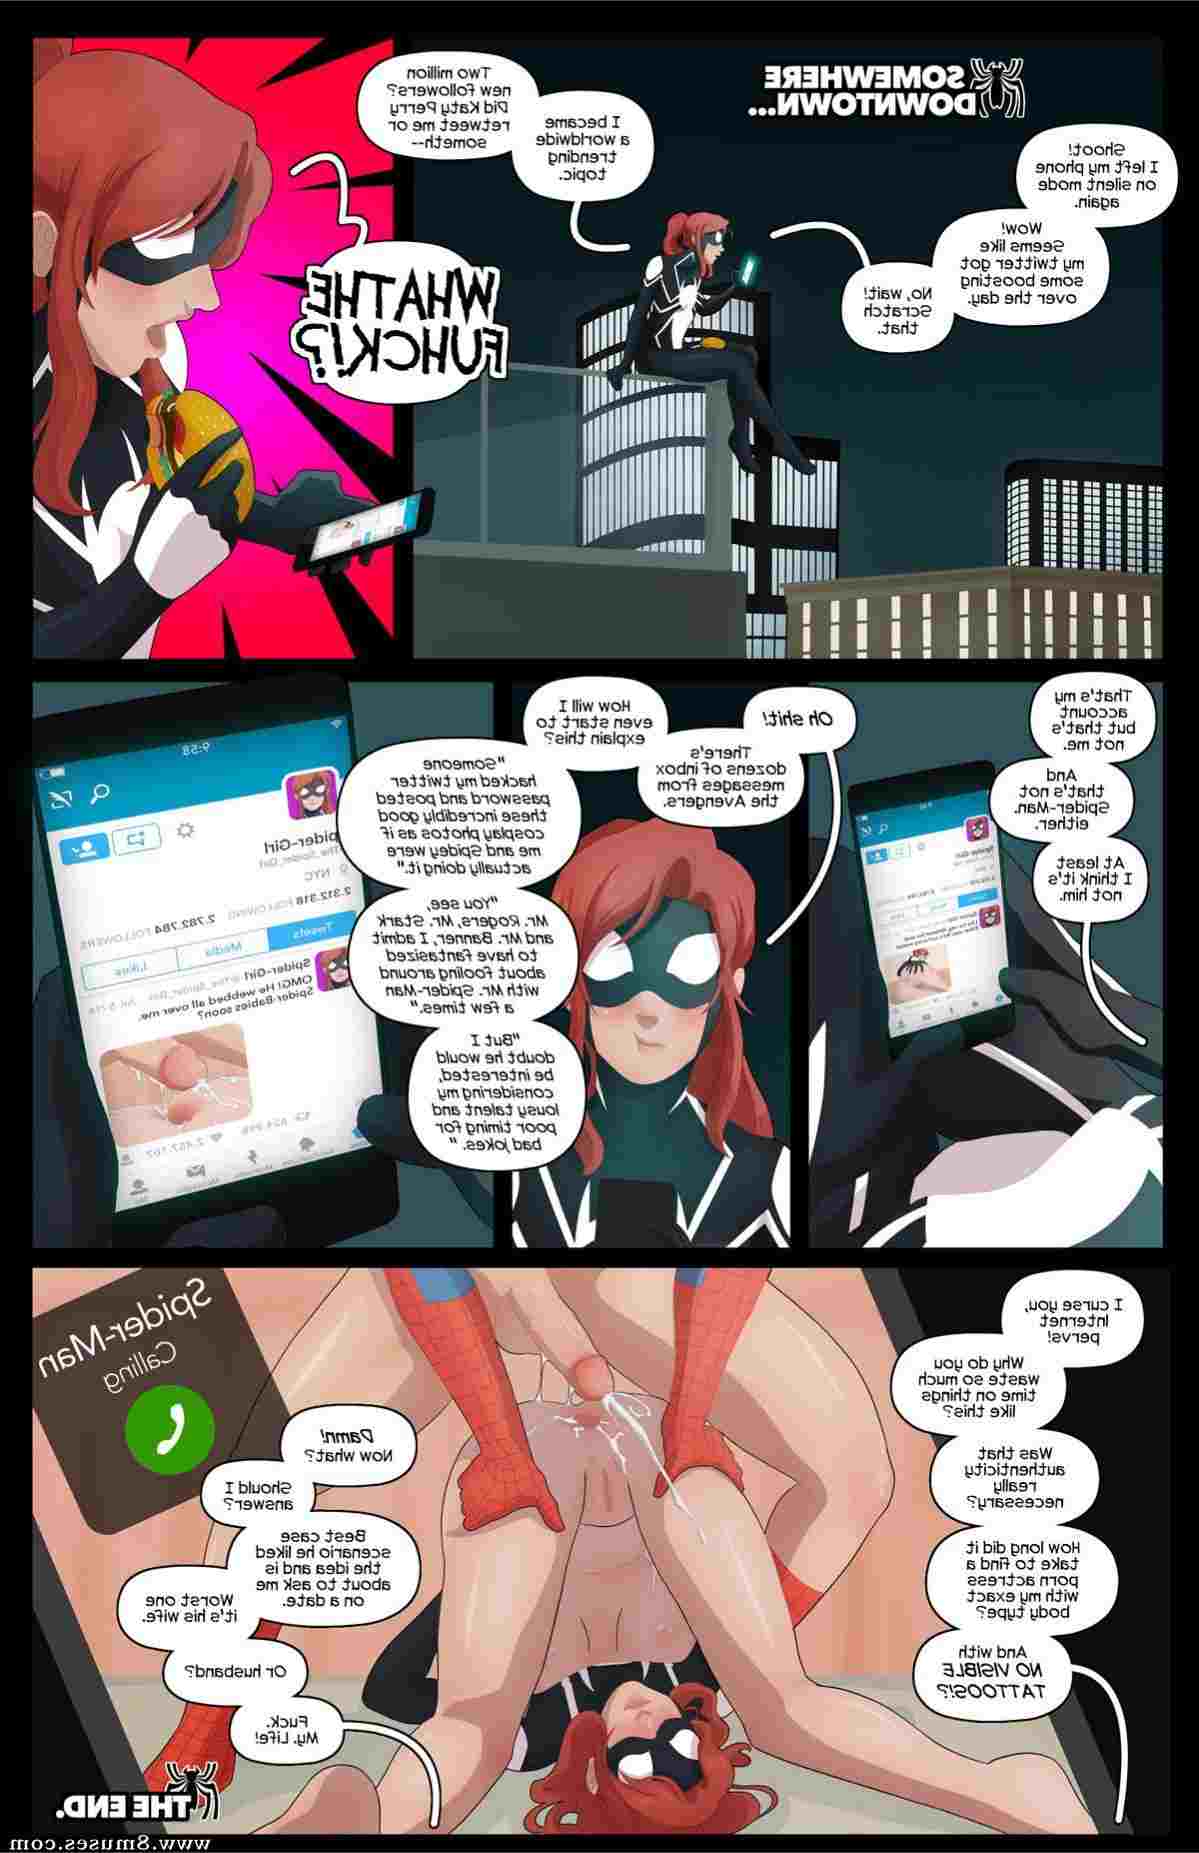 Tracy-Scops-Comics/SpiderFappening SpiderFappening__8muses_-_Sex_and_Porn_Comics_10.jpg